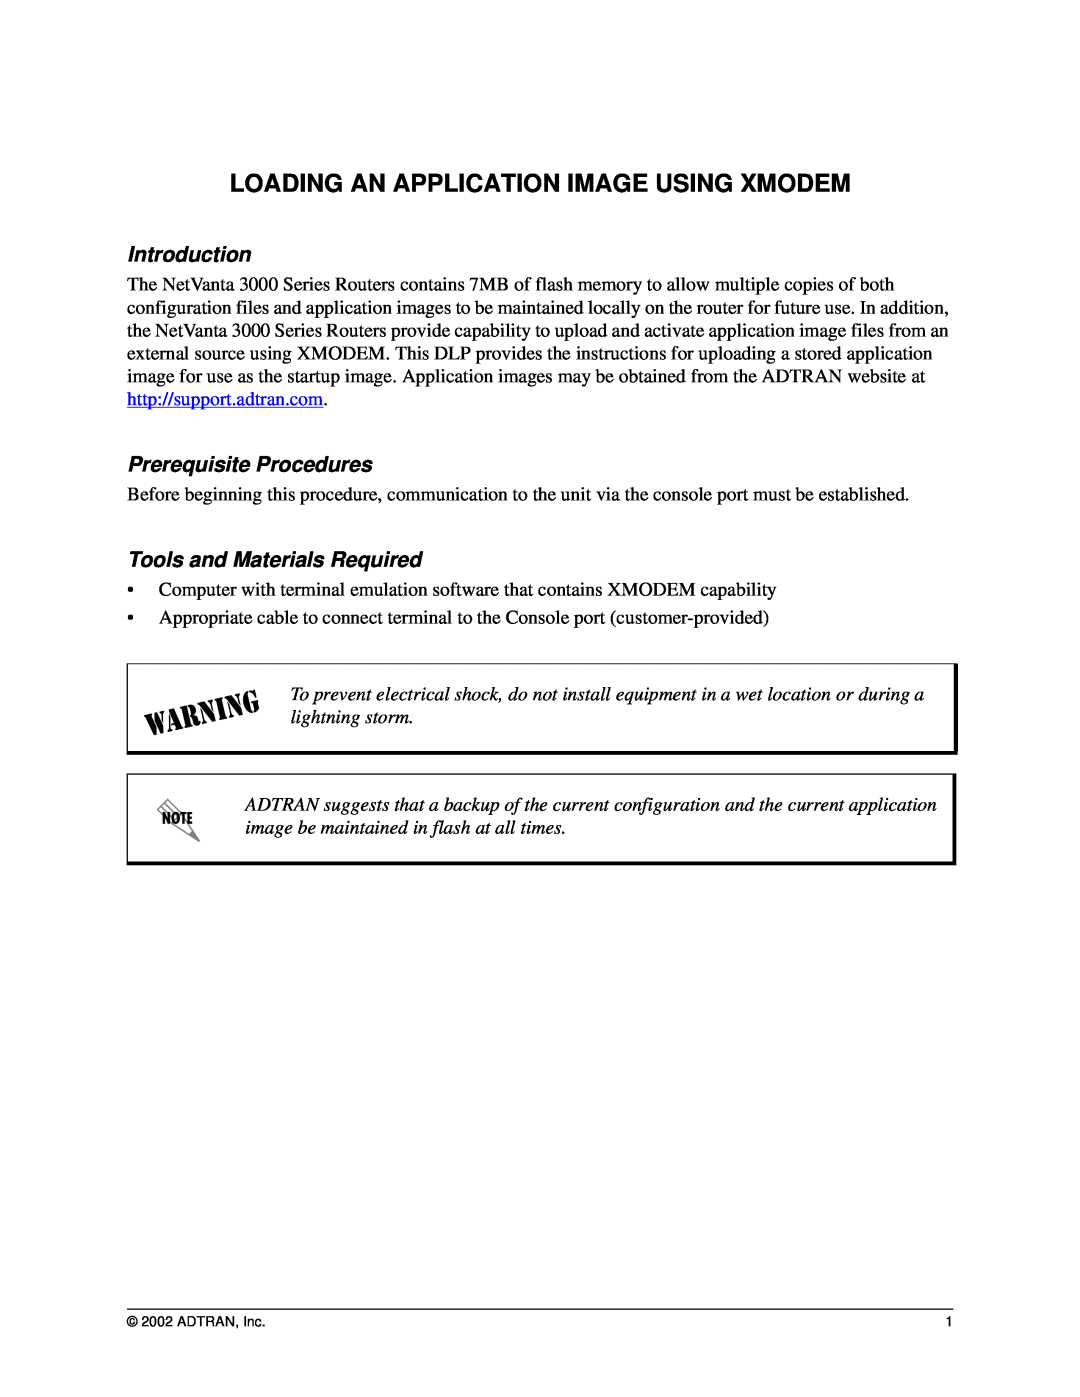 ADTRAN 3000 Series manual Loading An Application Image Using Xmodem, Introduction, Prerequisite Procedures 